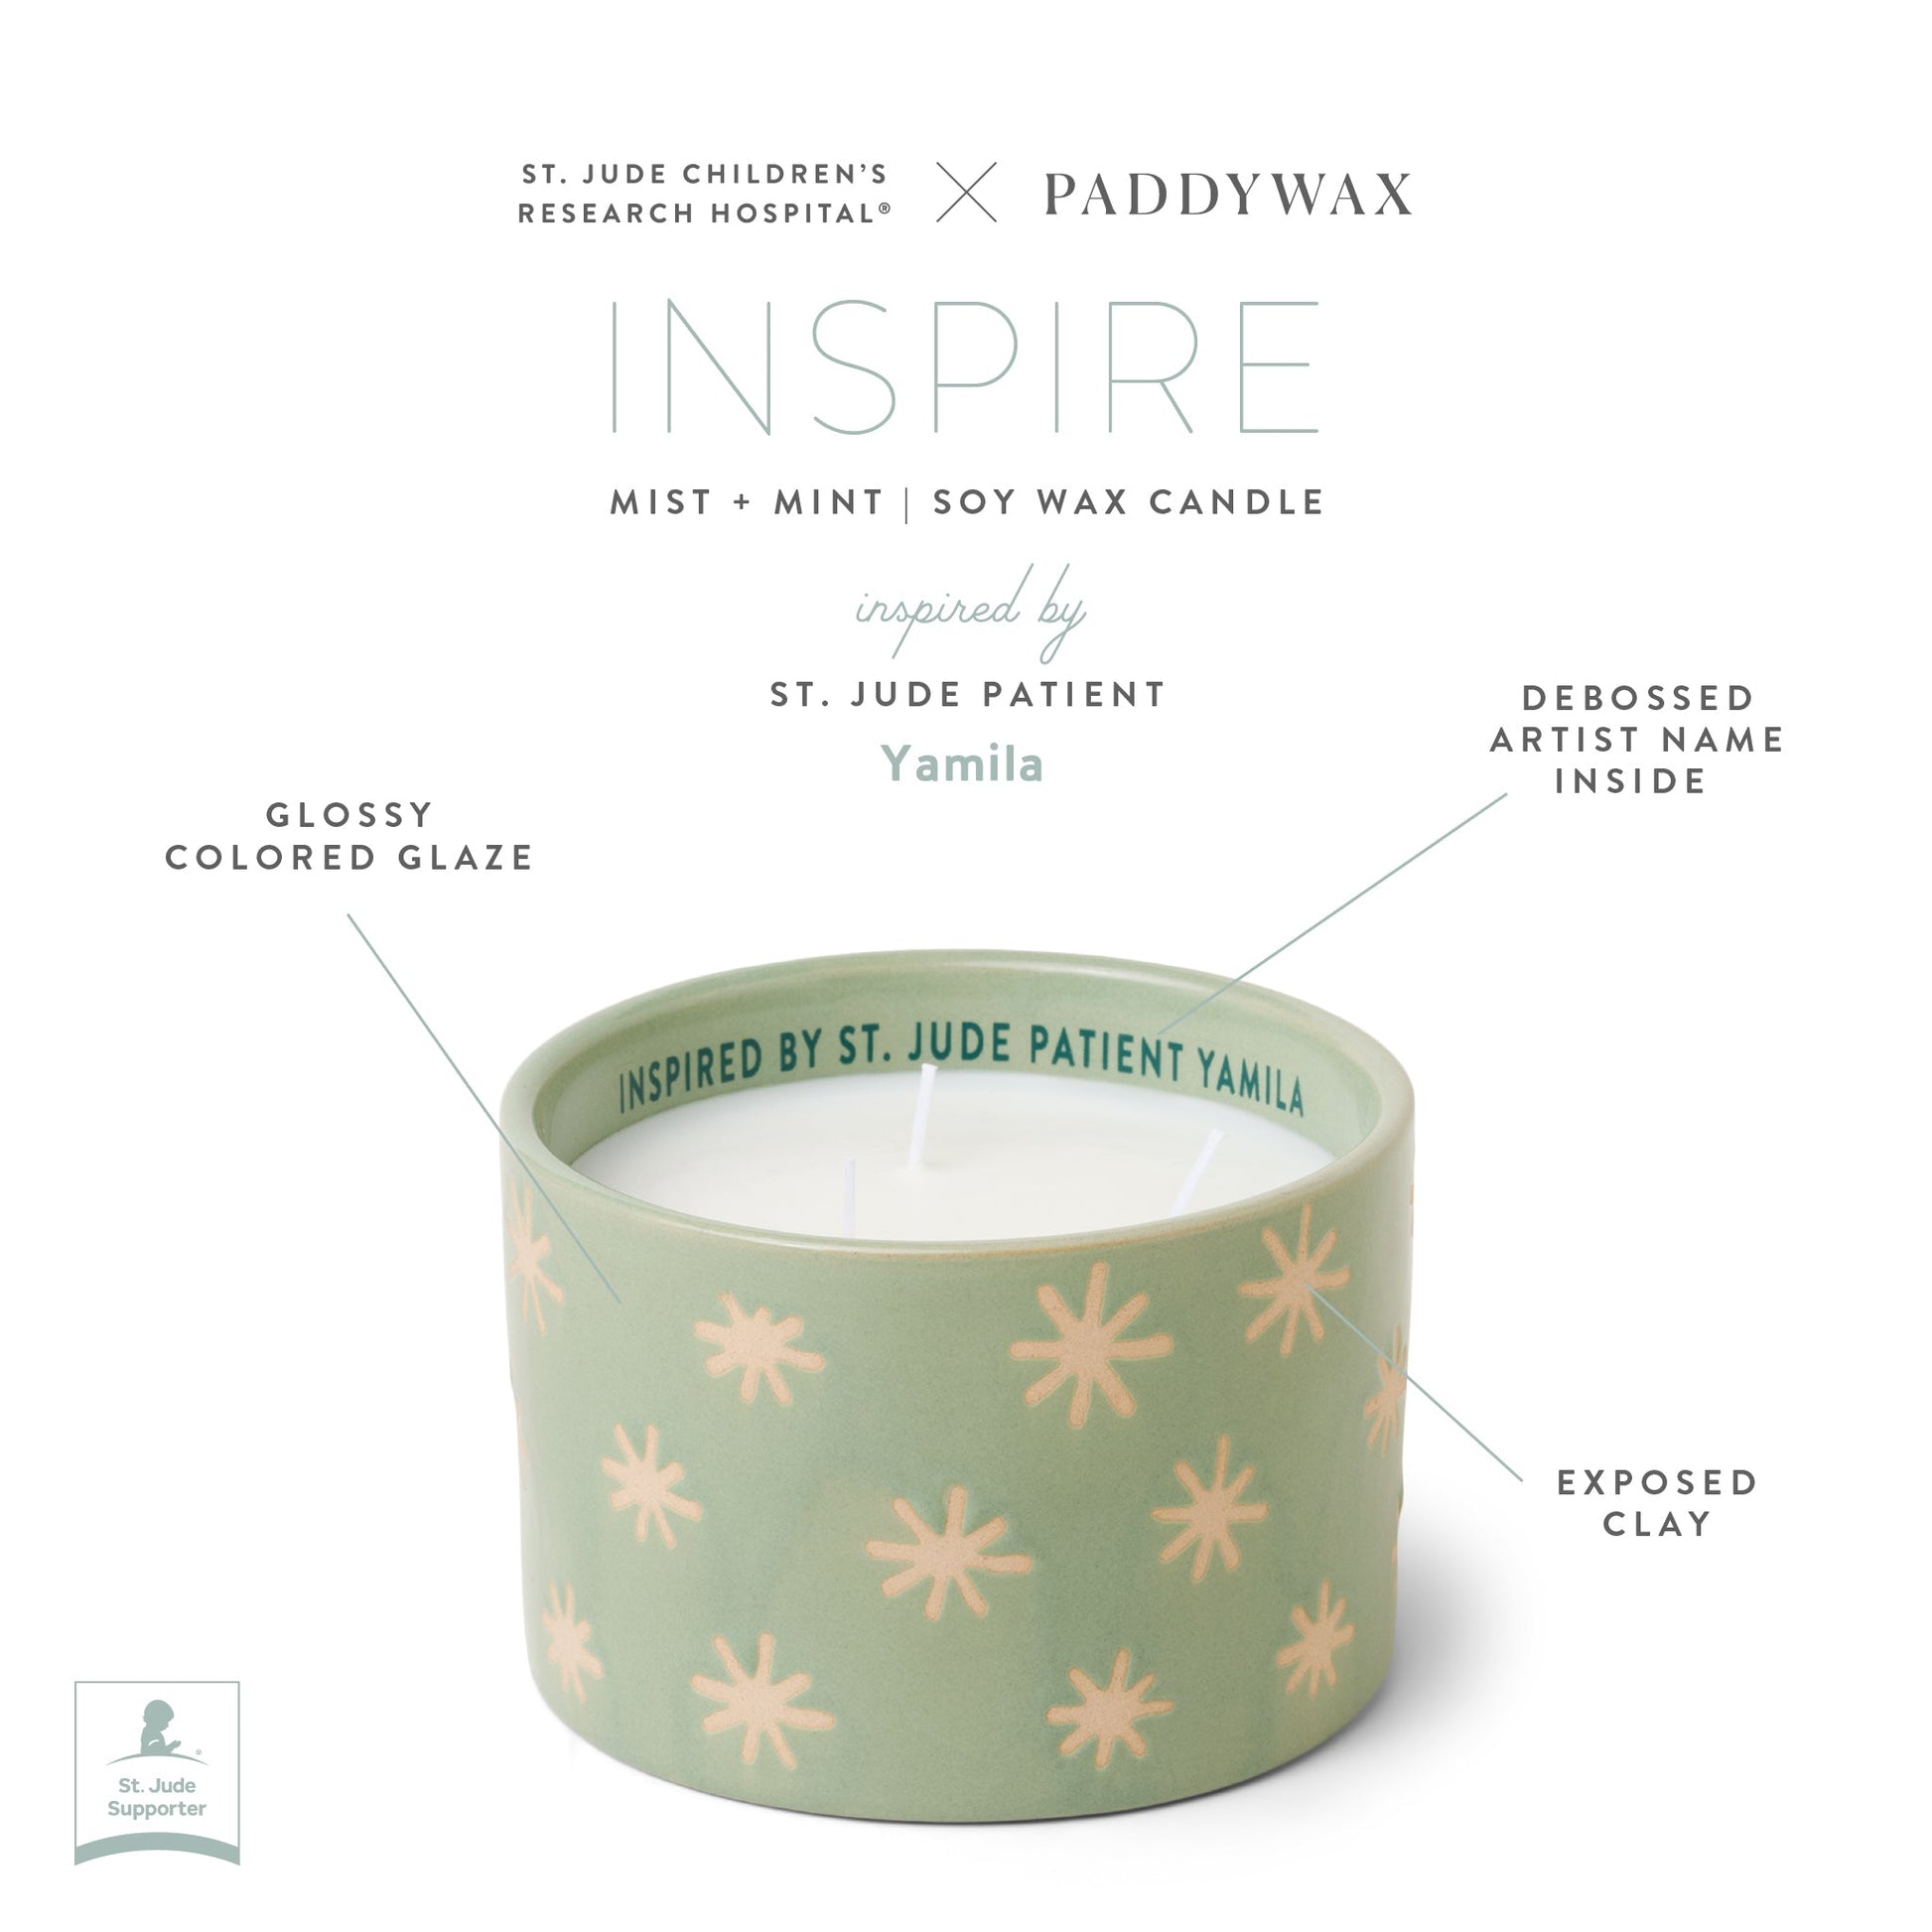 Infographic of green ceramic candle with product features text "St. Jude Children's Research Hospital ® x Paddywax Inspire Mist + Mint Soy Wax Candle inspired by St. Jude Patient Yamila. Glossy colored glazed. Debossed artist name inside. Exposed clay."